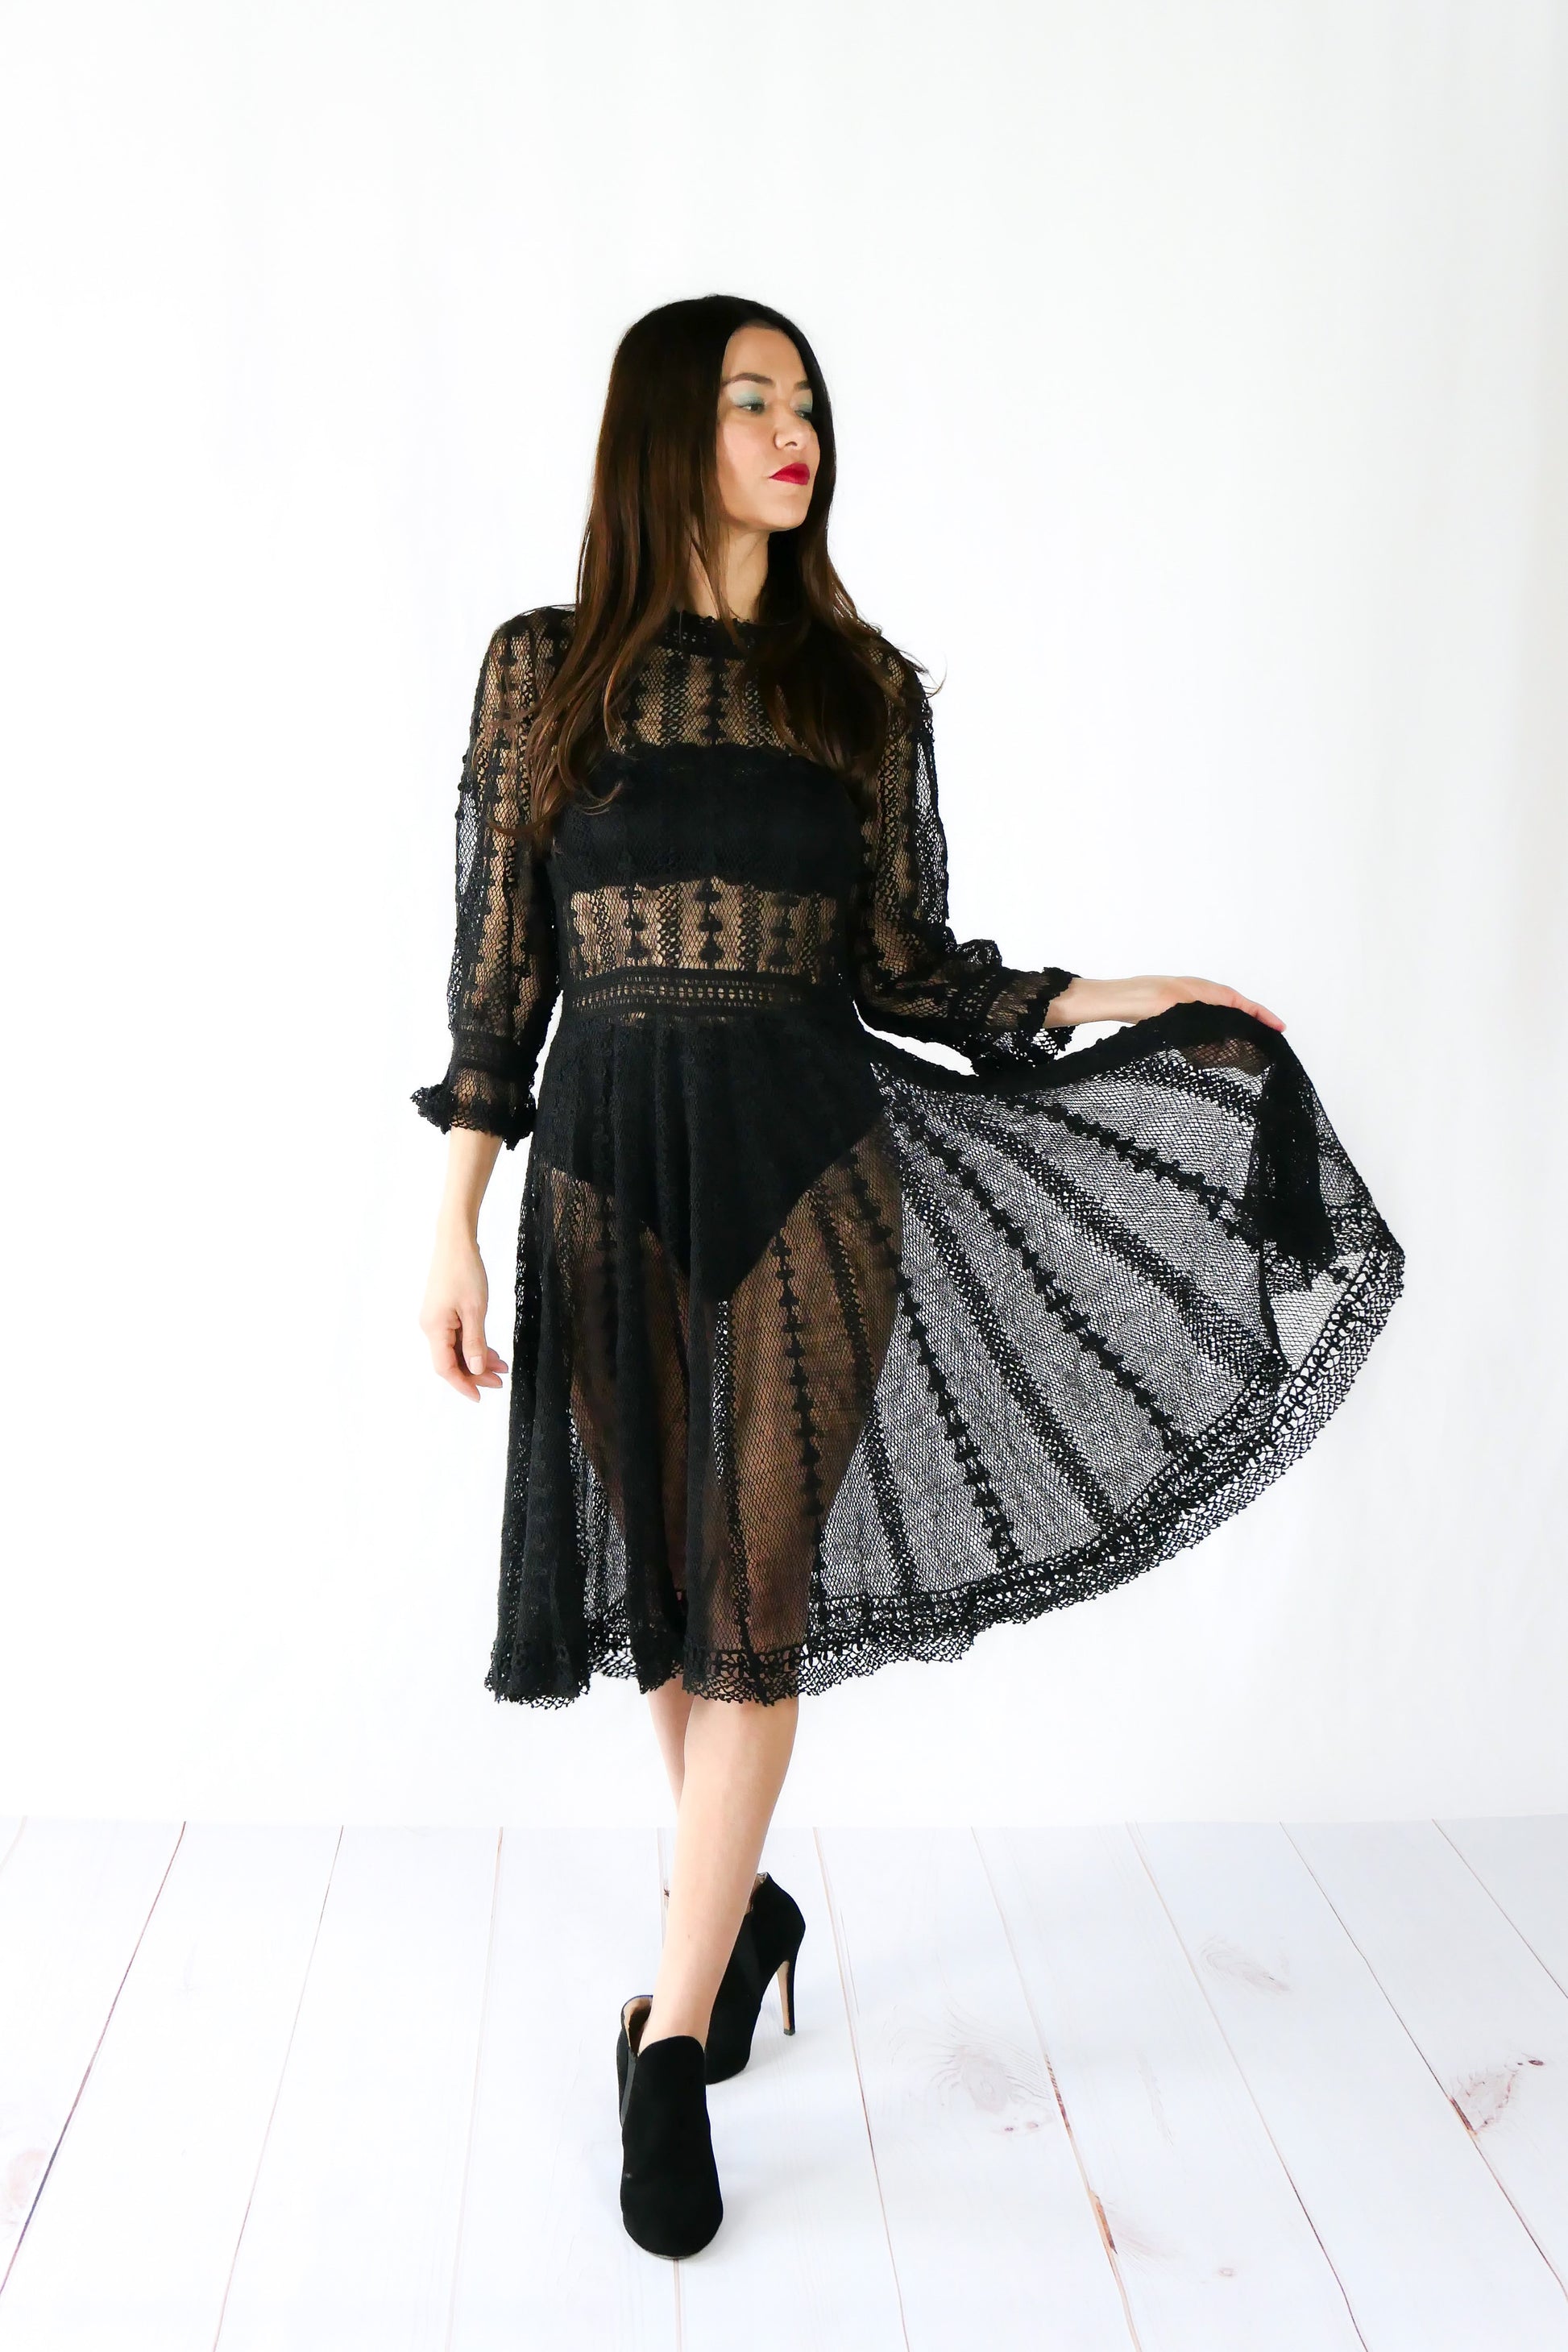 A beguiling black version of our cottage core style midi length crochet dress, this dreamy Lim's original vintage piece from the 1980s is made with very fine threads, creating a refined and sheer look. Detailed crochet trim is used at the waist, hemline, and 3/4 length ruffled sleeves. Measurements:  Bust 36” Waist 30” Length 42” Shoulder width 15” Sleeve 20” Cuff circumference 9" Color: Black